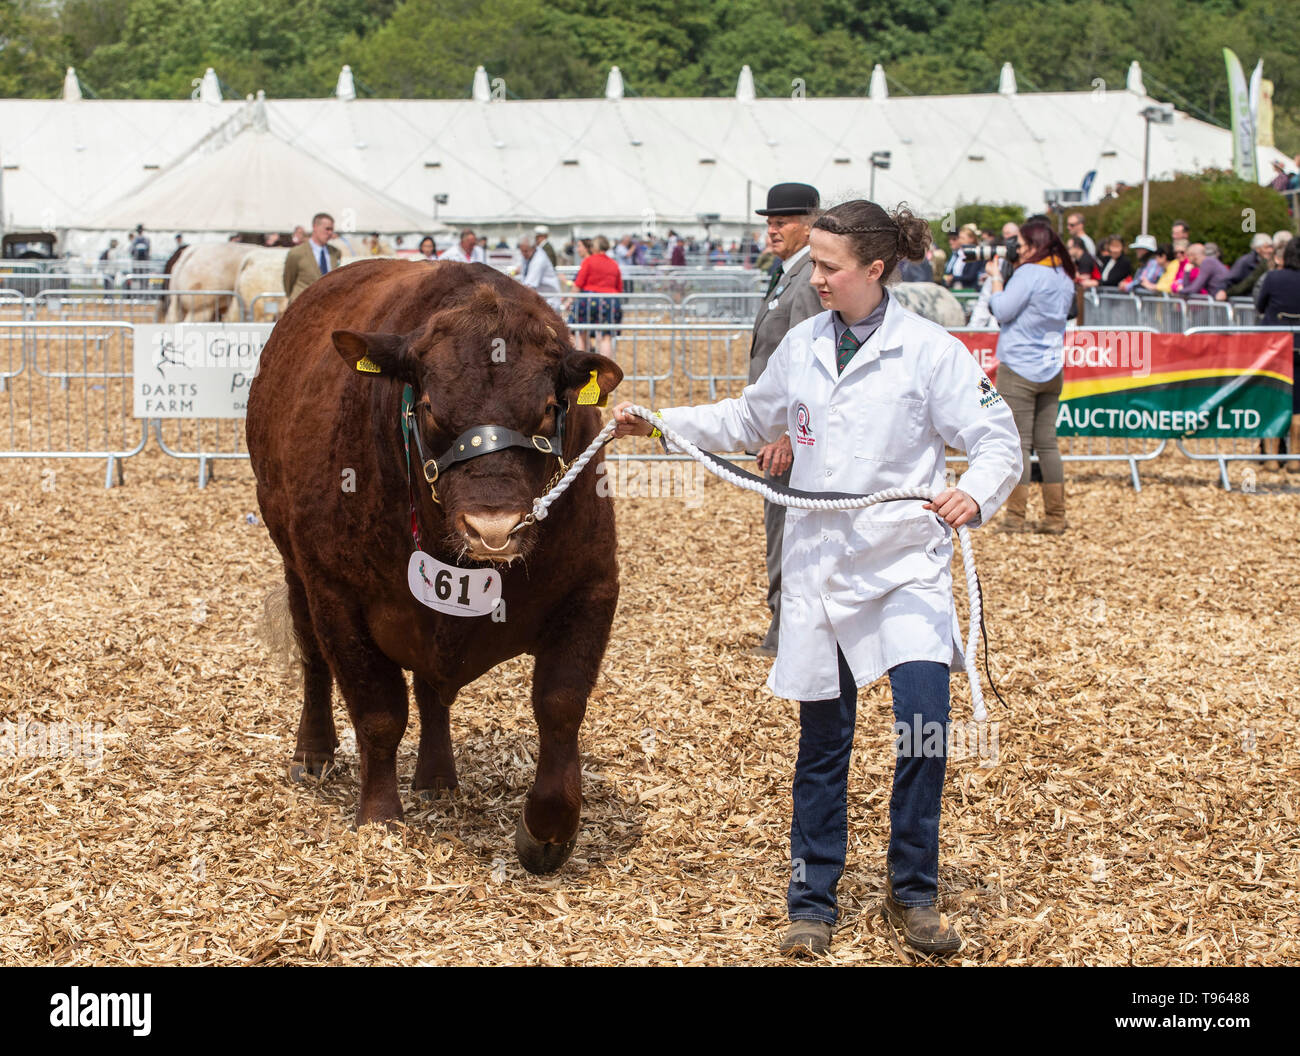 Herdswoman with the winning beast - Ruby Red Devon bull at the Devon County Show, 2019 Stock Photo